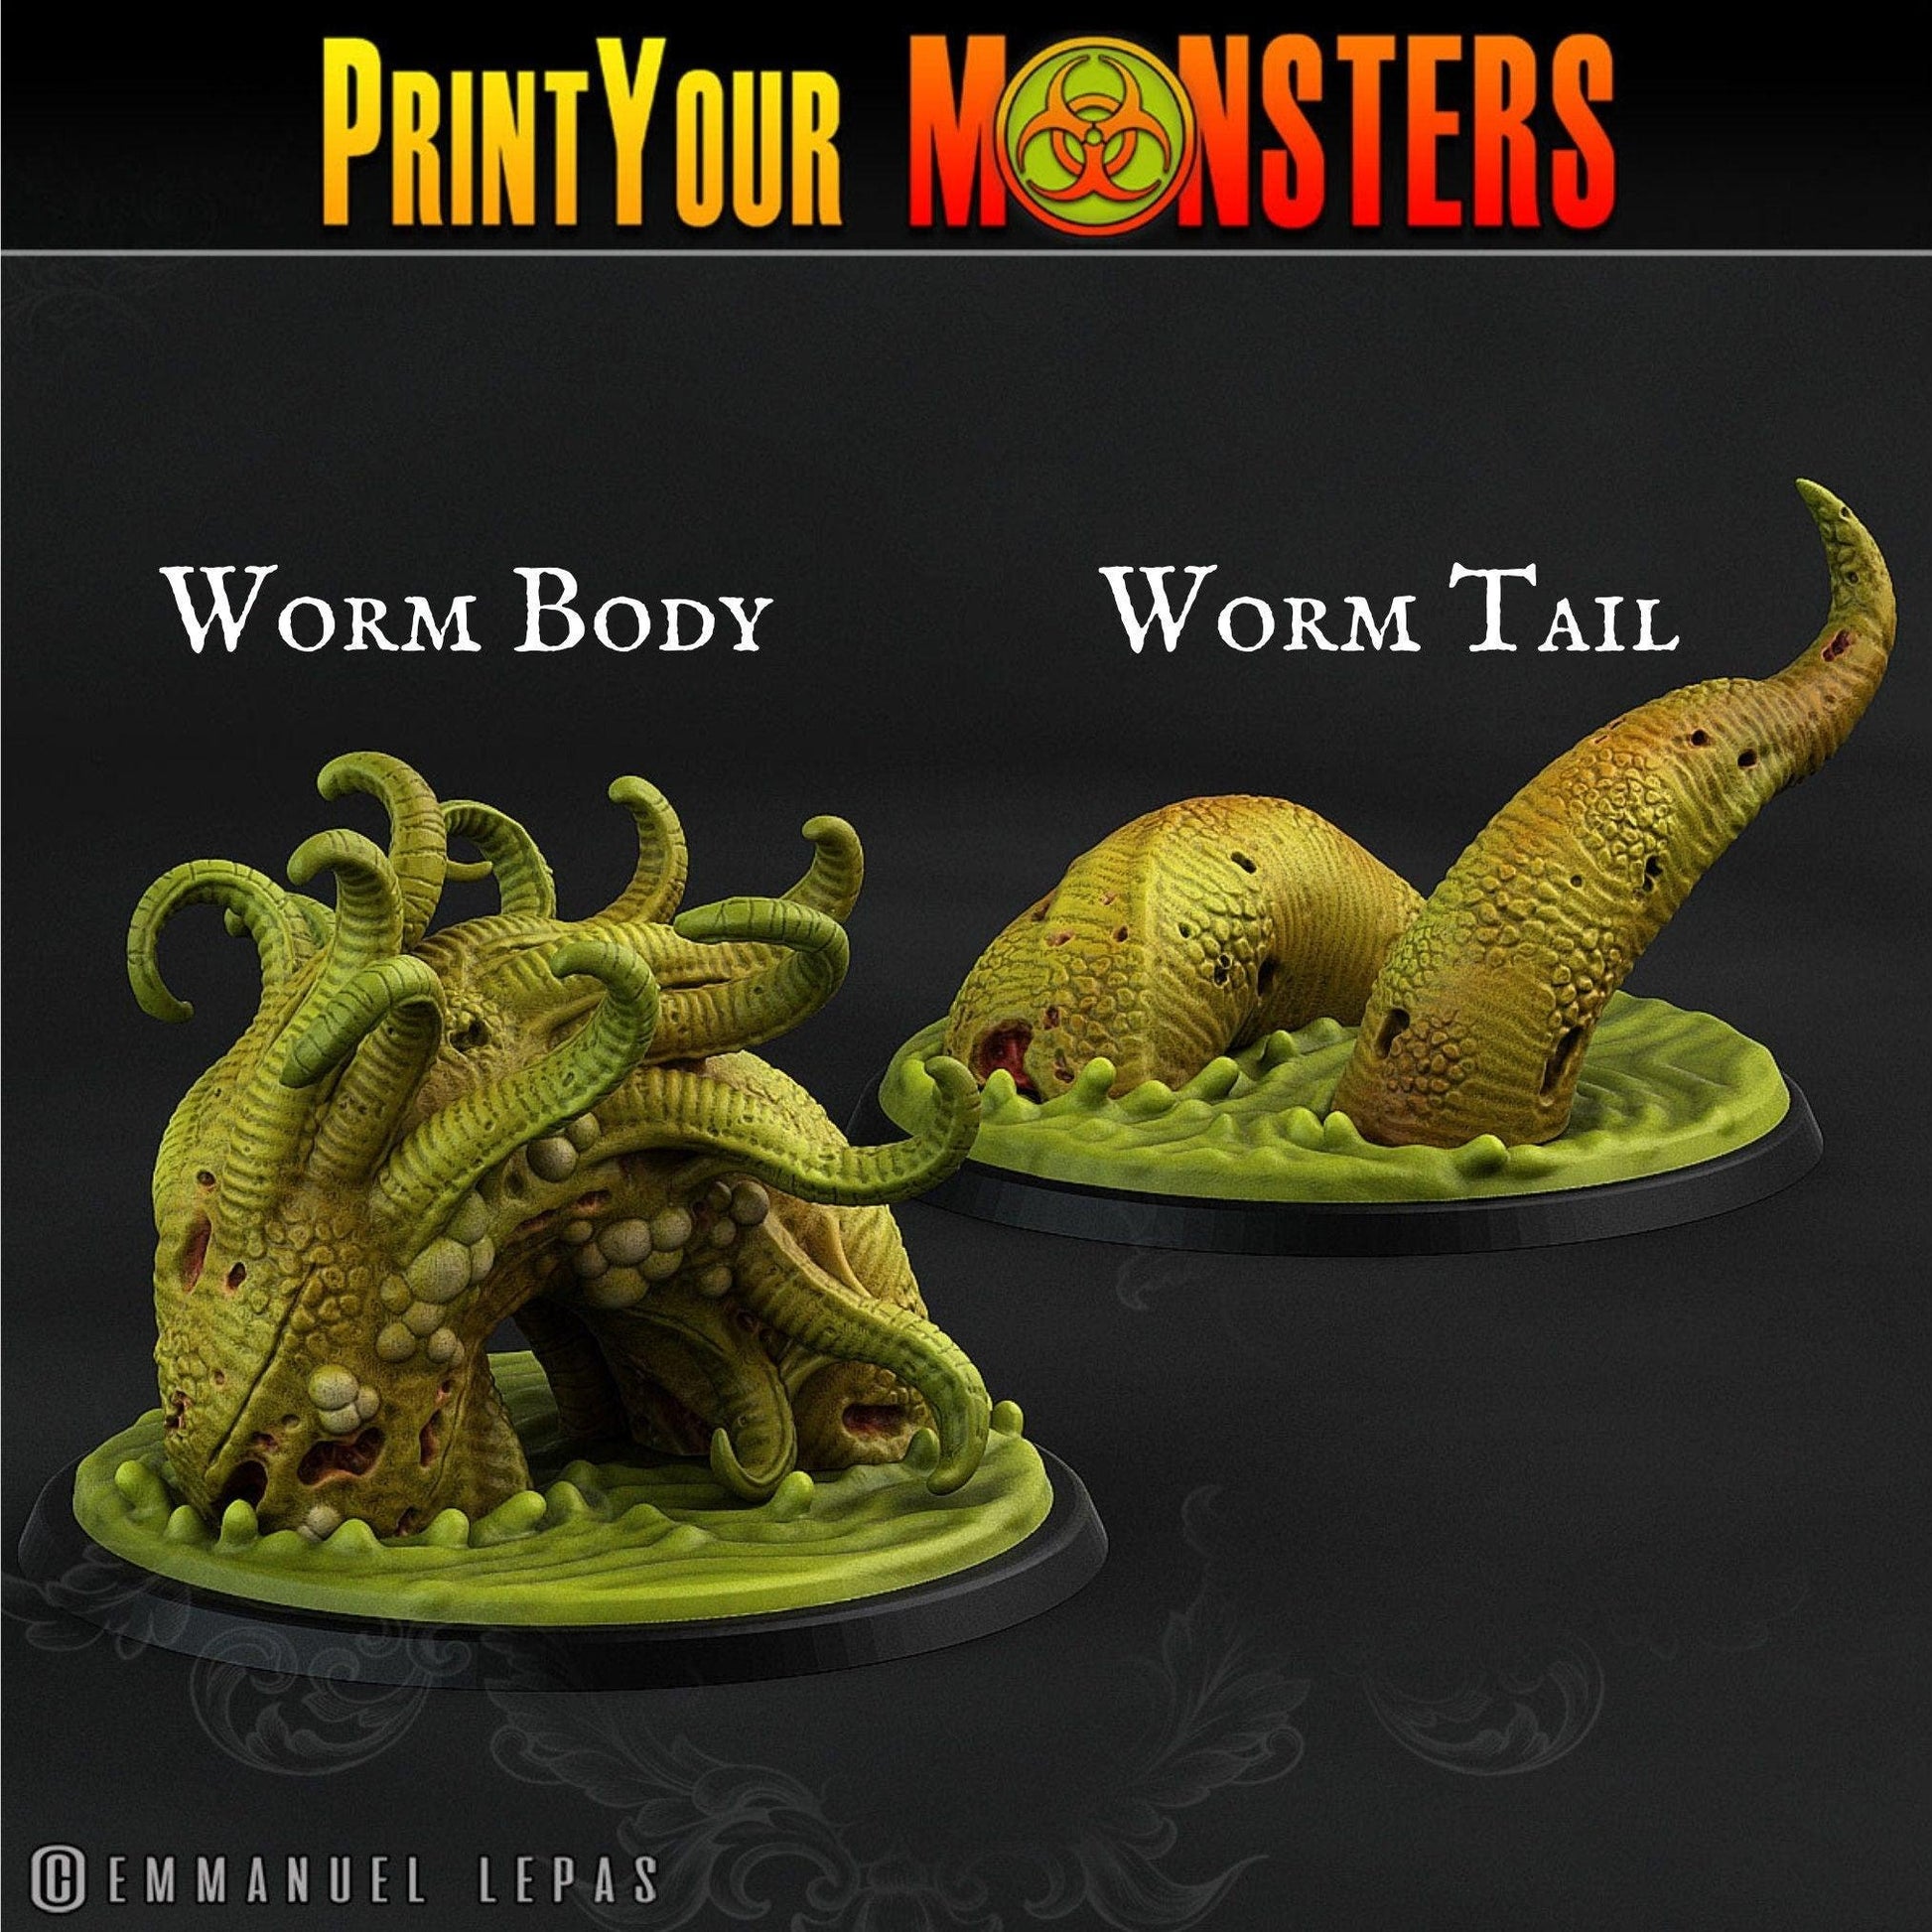 Plague Worm Miniatures Monster Miniature | Print Your Monsters | Tabletop gaming | DnD Miniature | Dungeons and Dragons, dnd 5e worm miniature - Plague Miniatures shop for DnD Miniatures